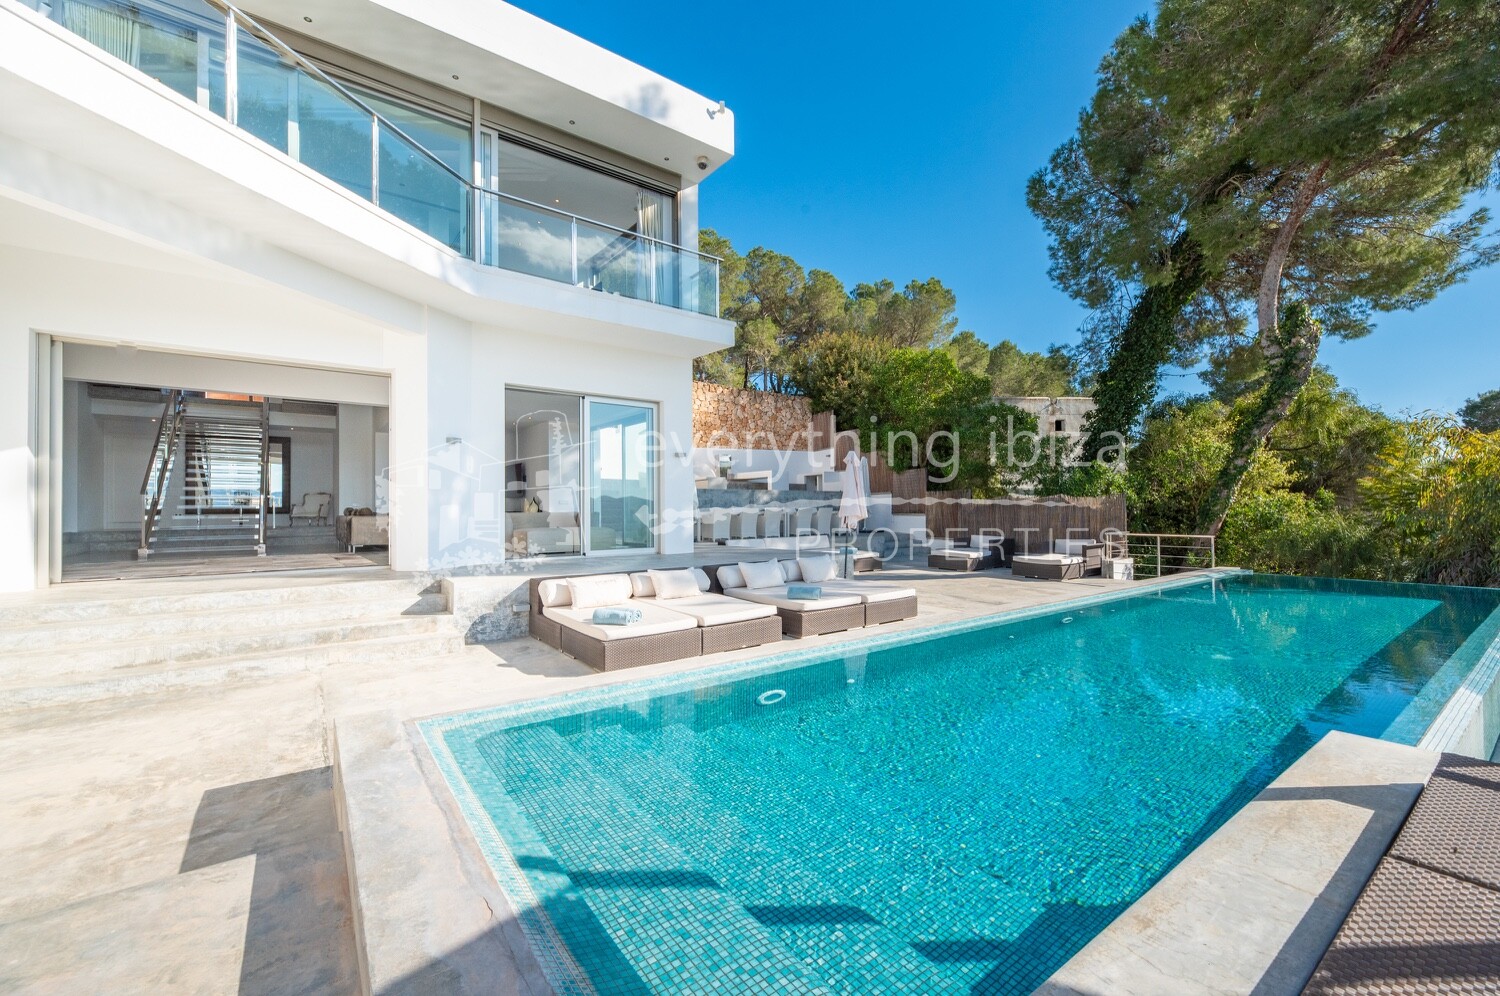 Stunning Hilltop Villa of the Finest Quality with Amazing Views in Can Furnet, ref. 1624, for sale in Ibiza by everything ibiza Properties